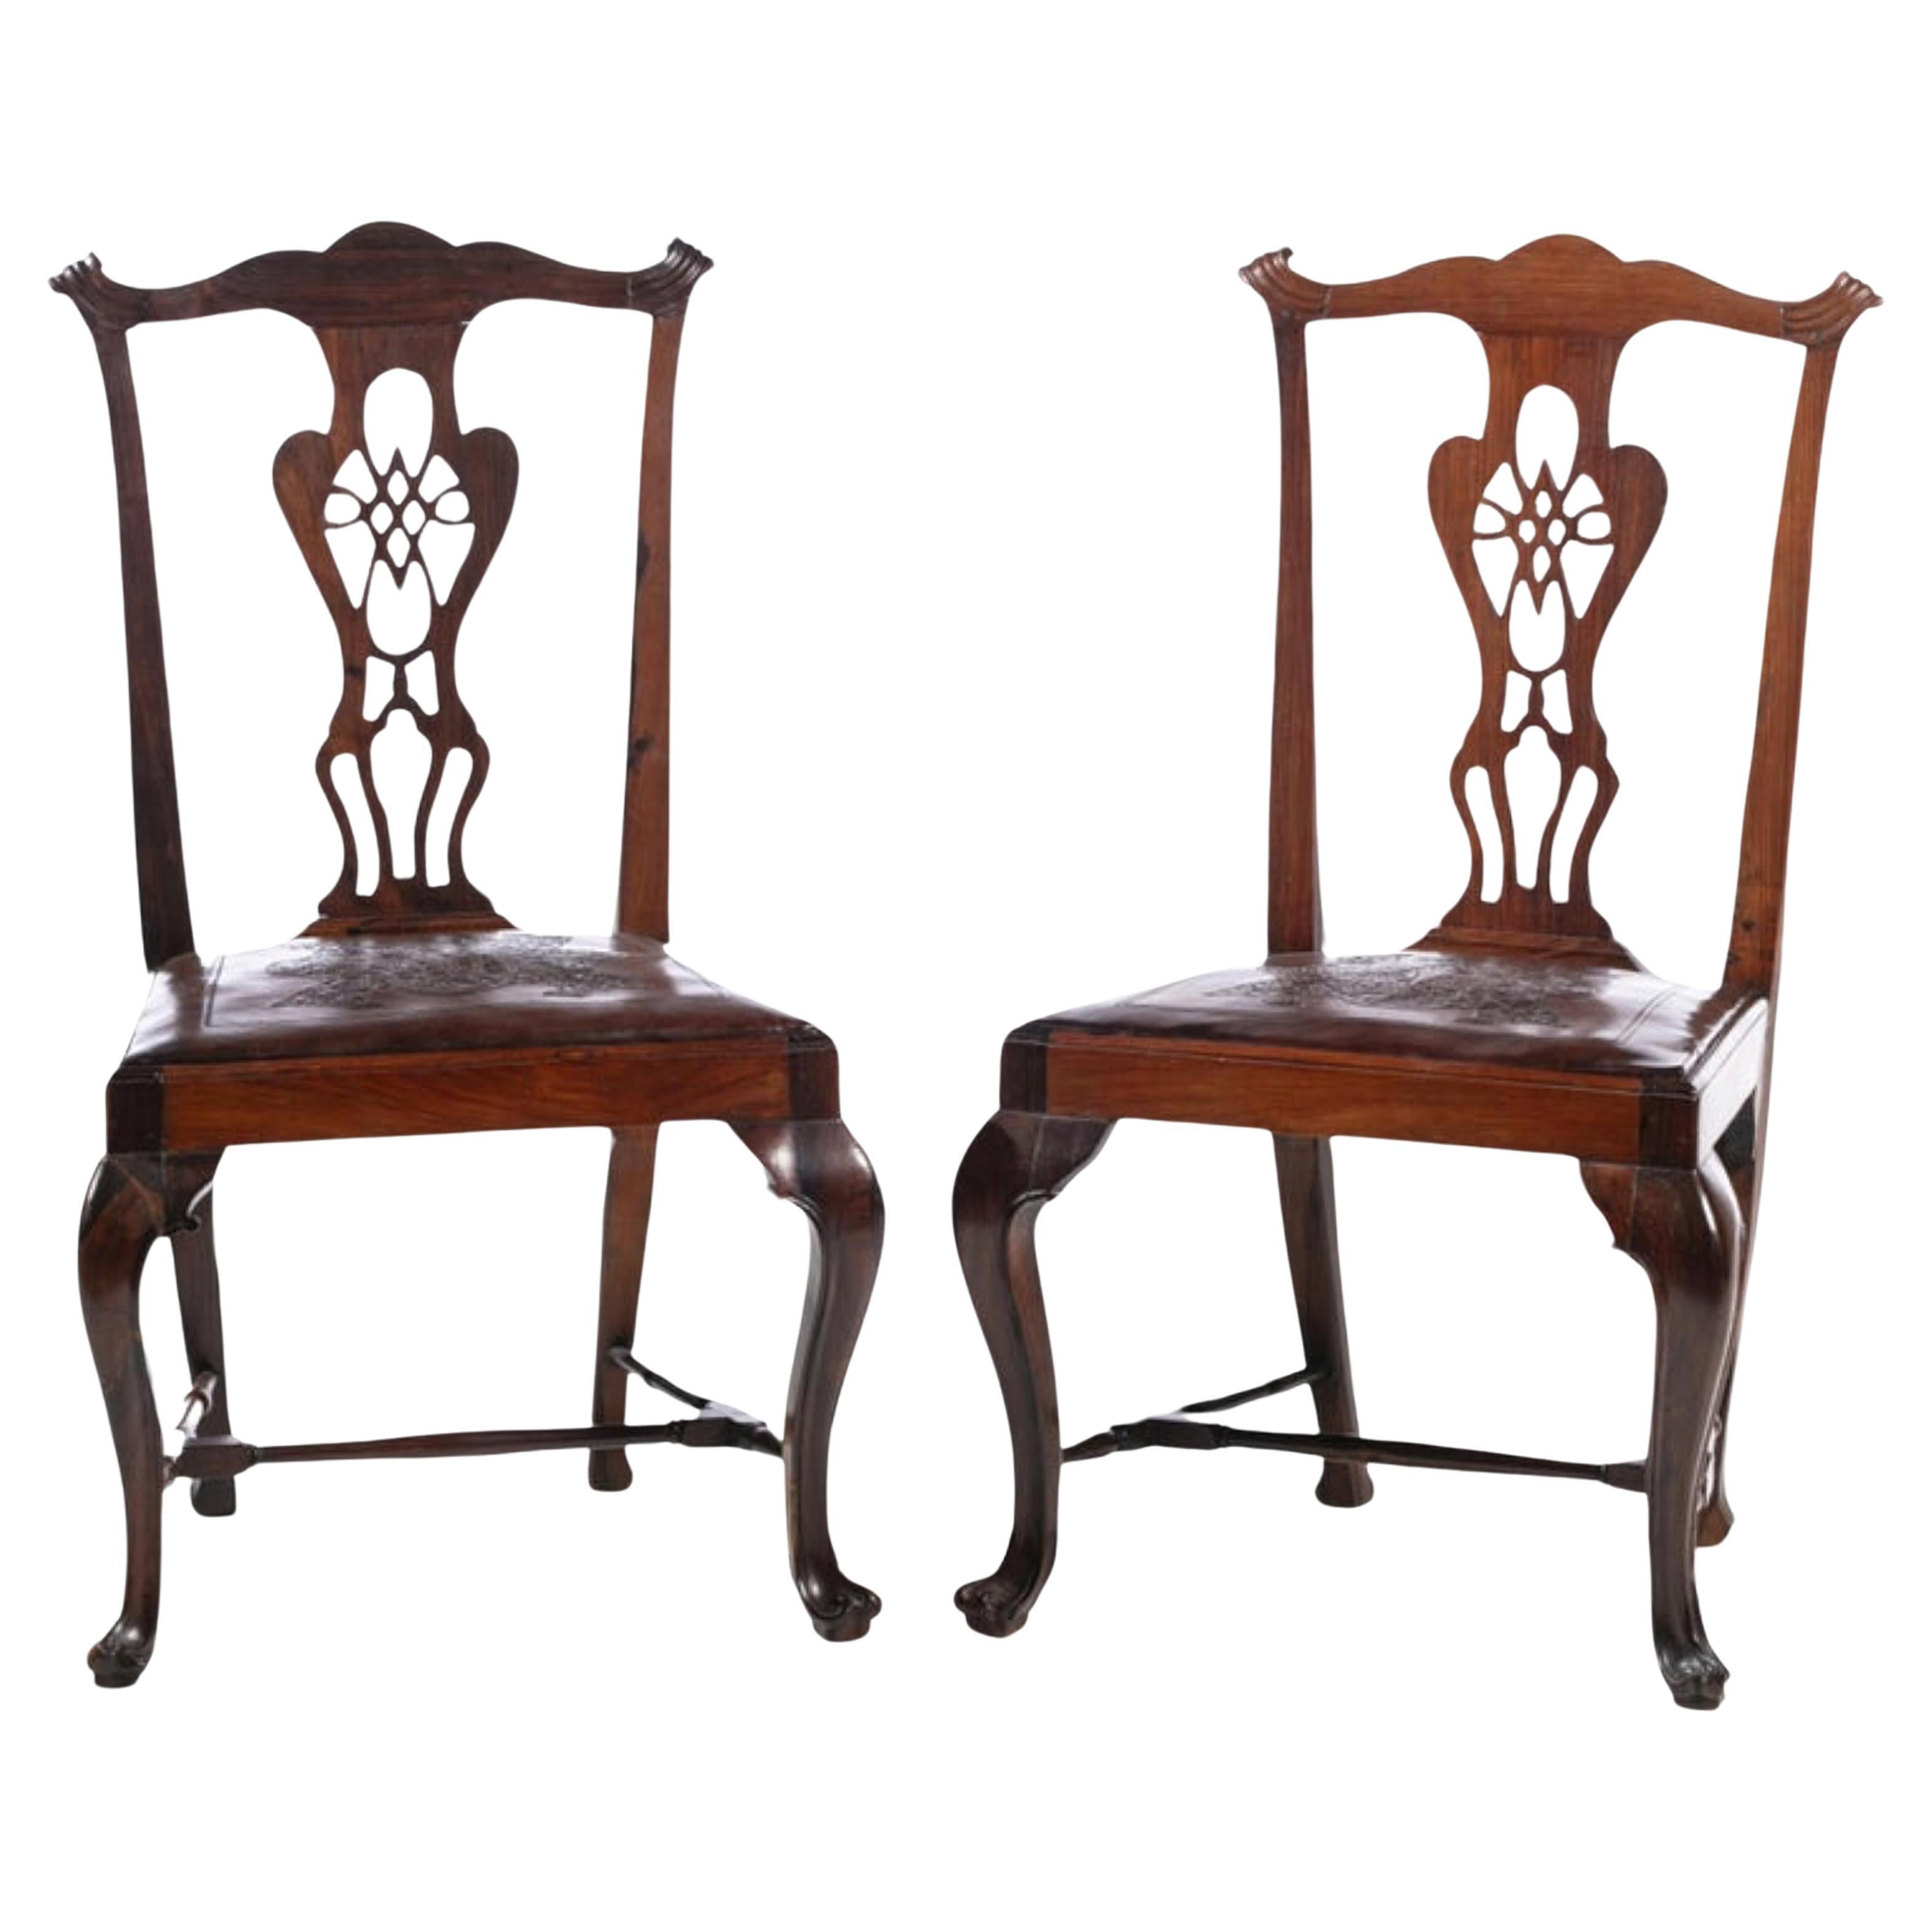 PAIR OF PORTUGUESE CHAIRS 18th Century